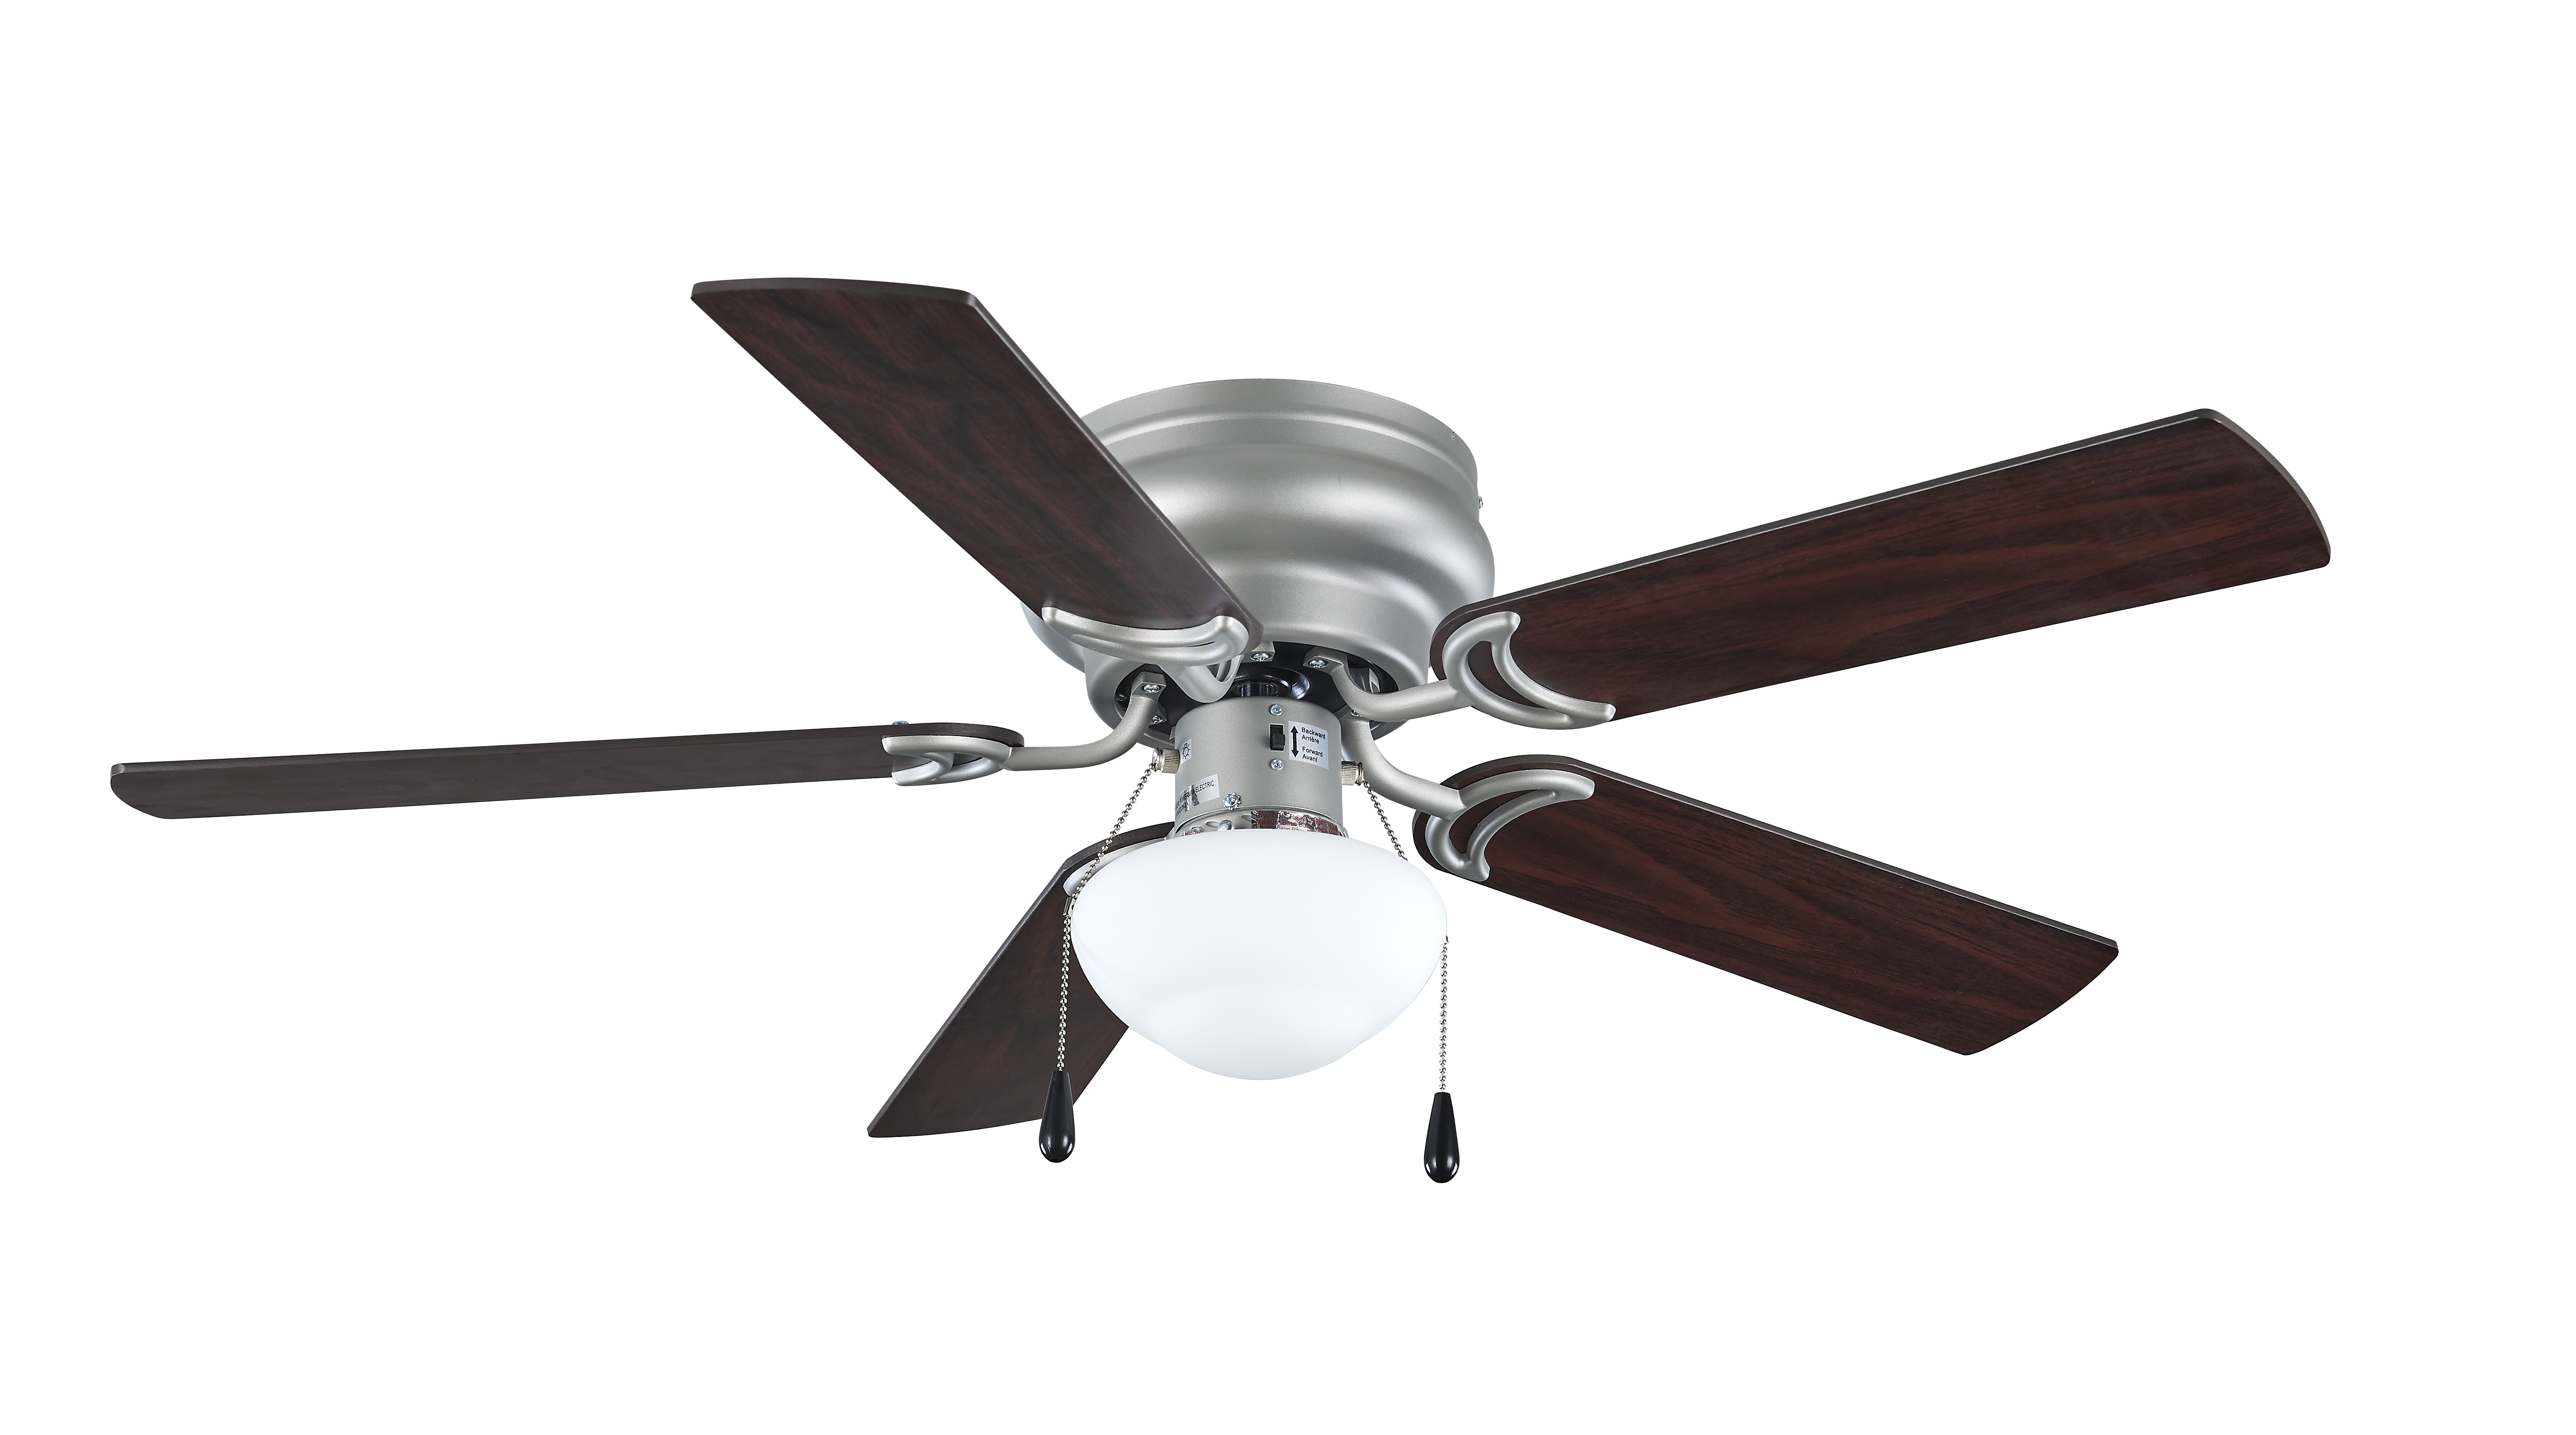 Mainstays 44" Hugger Indoor Ceiling Fan with Single Light, Satin Nickel, 5 Blades, LED, Reverse Airflow - image 5 of 8